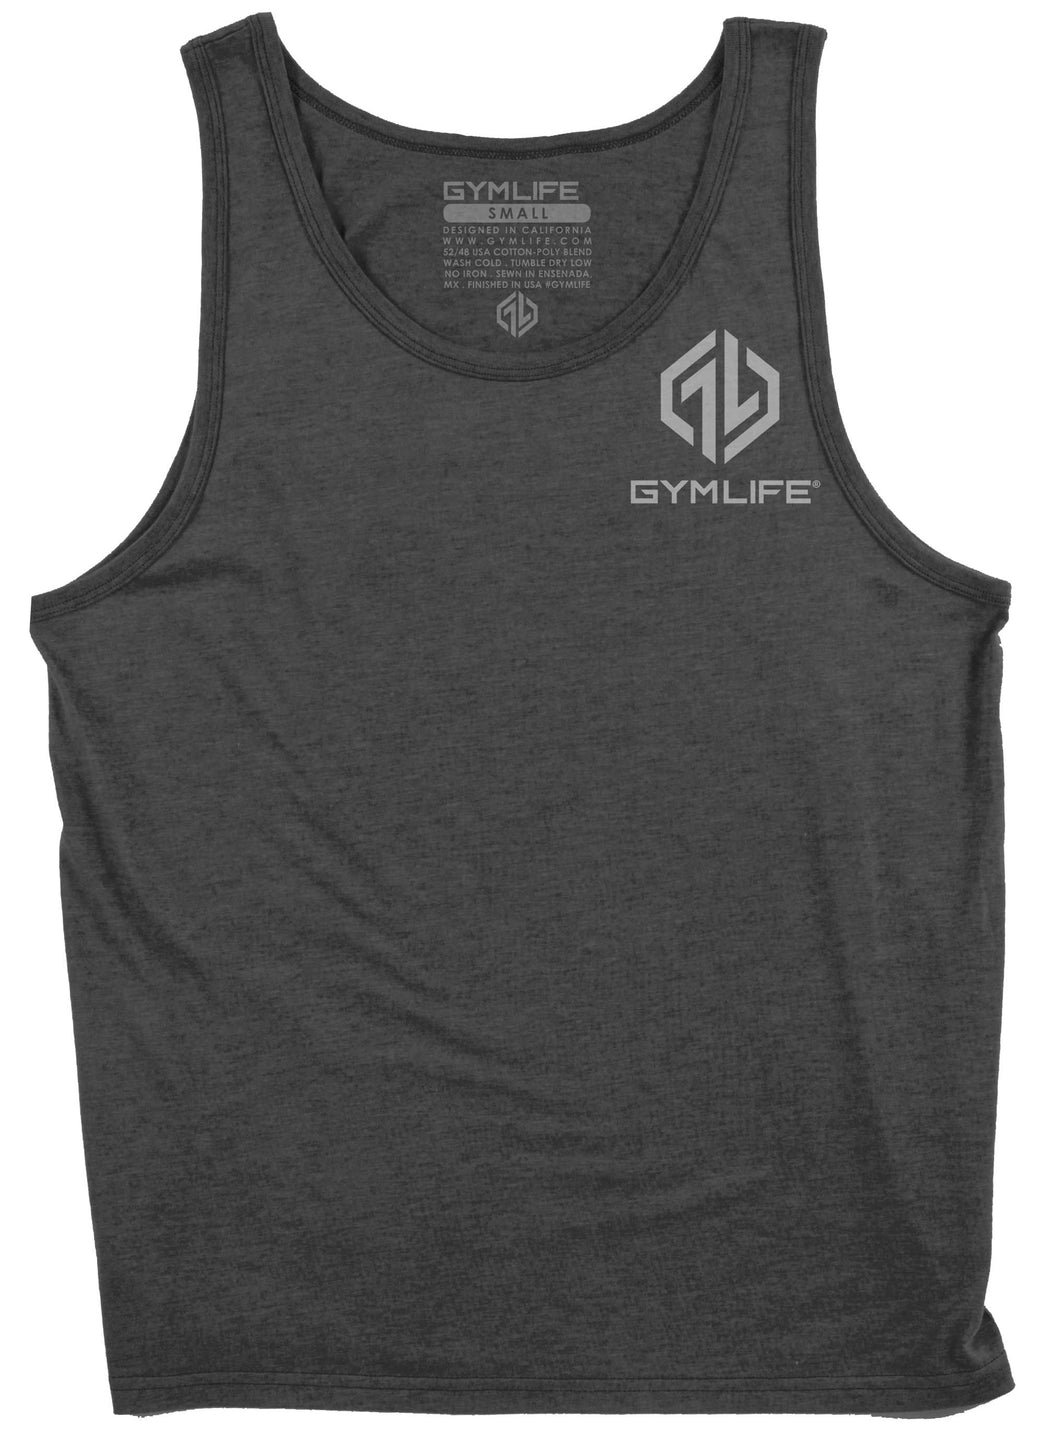 Gym Life® Mens - Power Up Icon - 52/48 Athletic Tank Top - Dark Charcoal